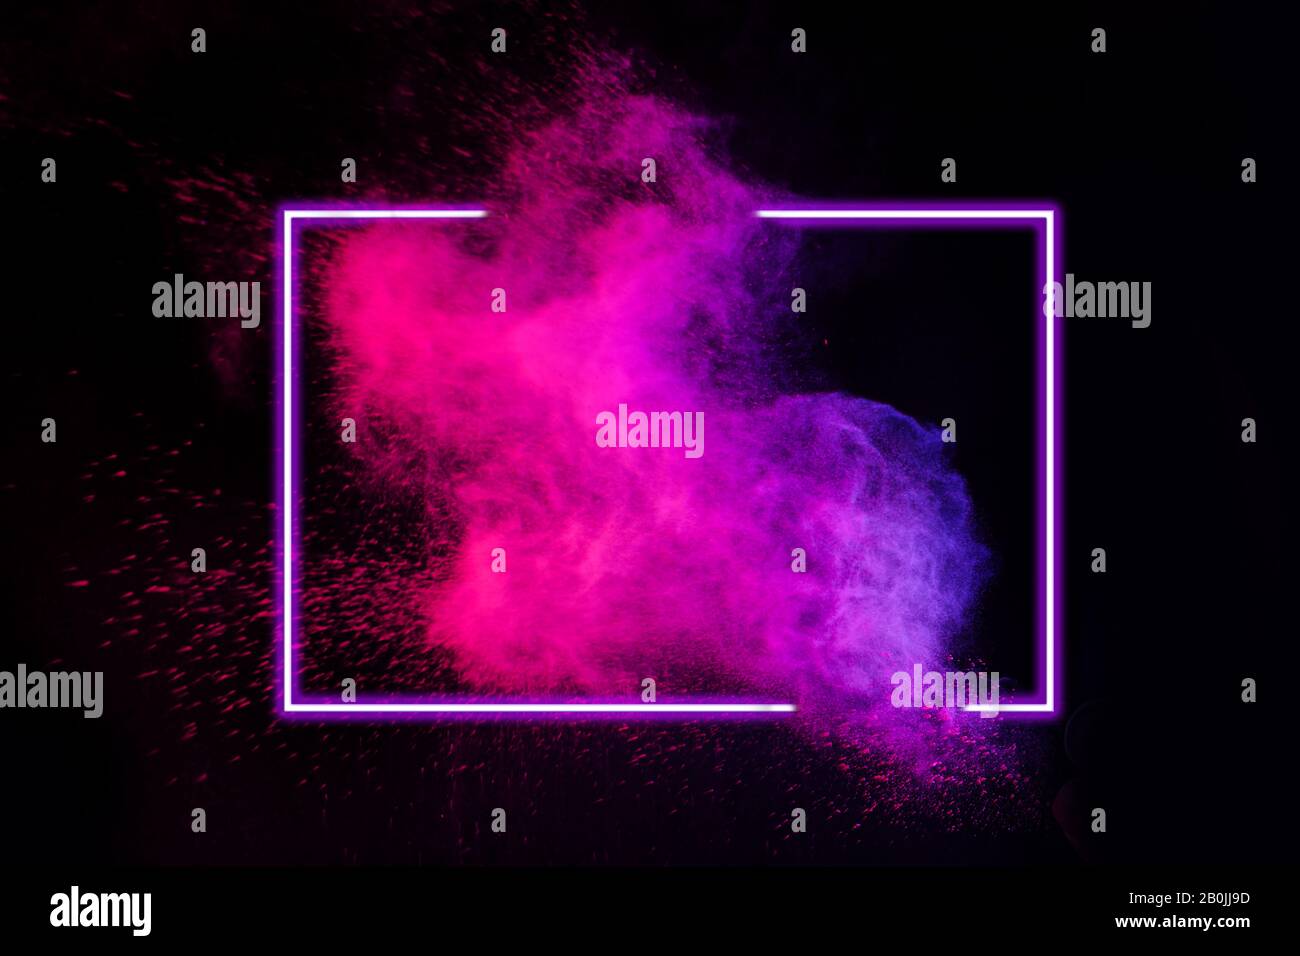 Abstract Color Splash With Neon Frame For Wallpaper Design Colorful Dust Explode Paint Splash On White Background Stock Photo Alamy